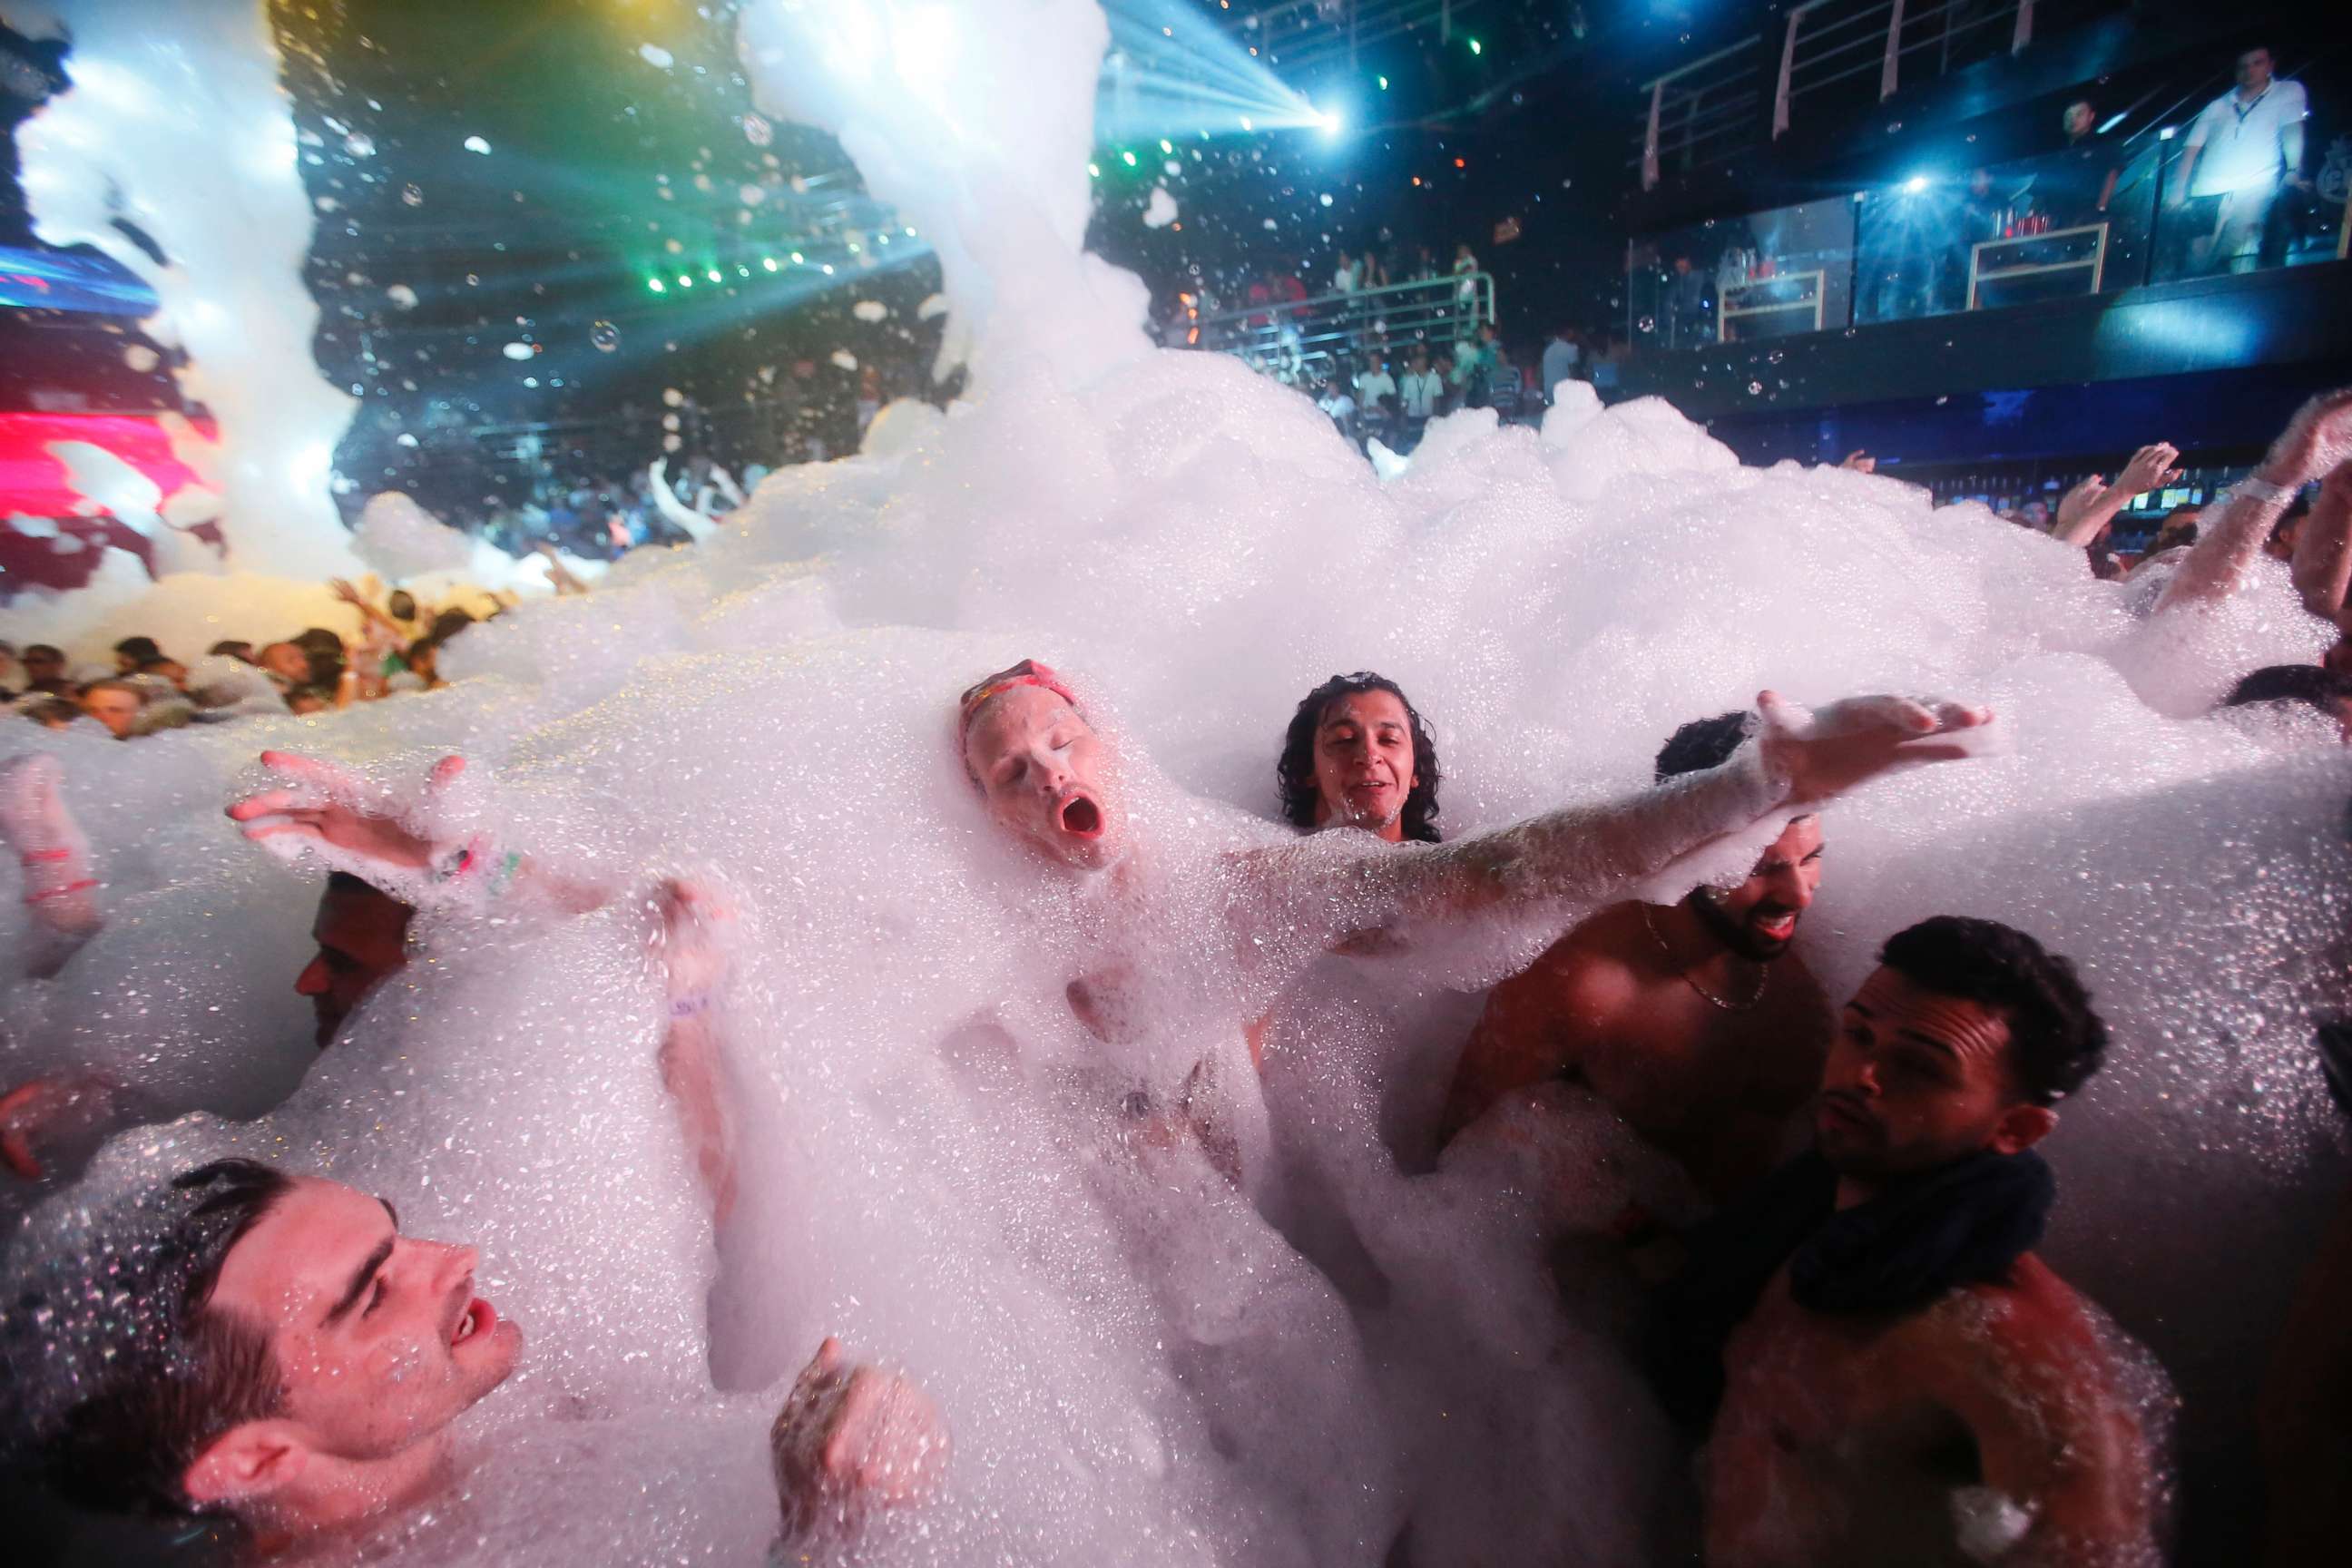 PHOTO: Partygoers dance in foam at a nightclub in the Caribbean resort city of Cancun, Mexico, March 16, 2015.